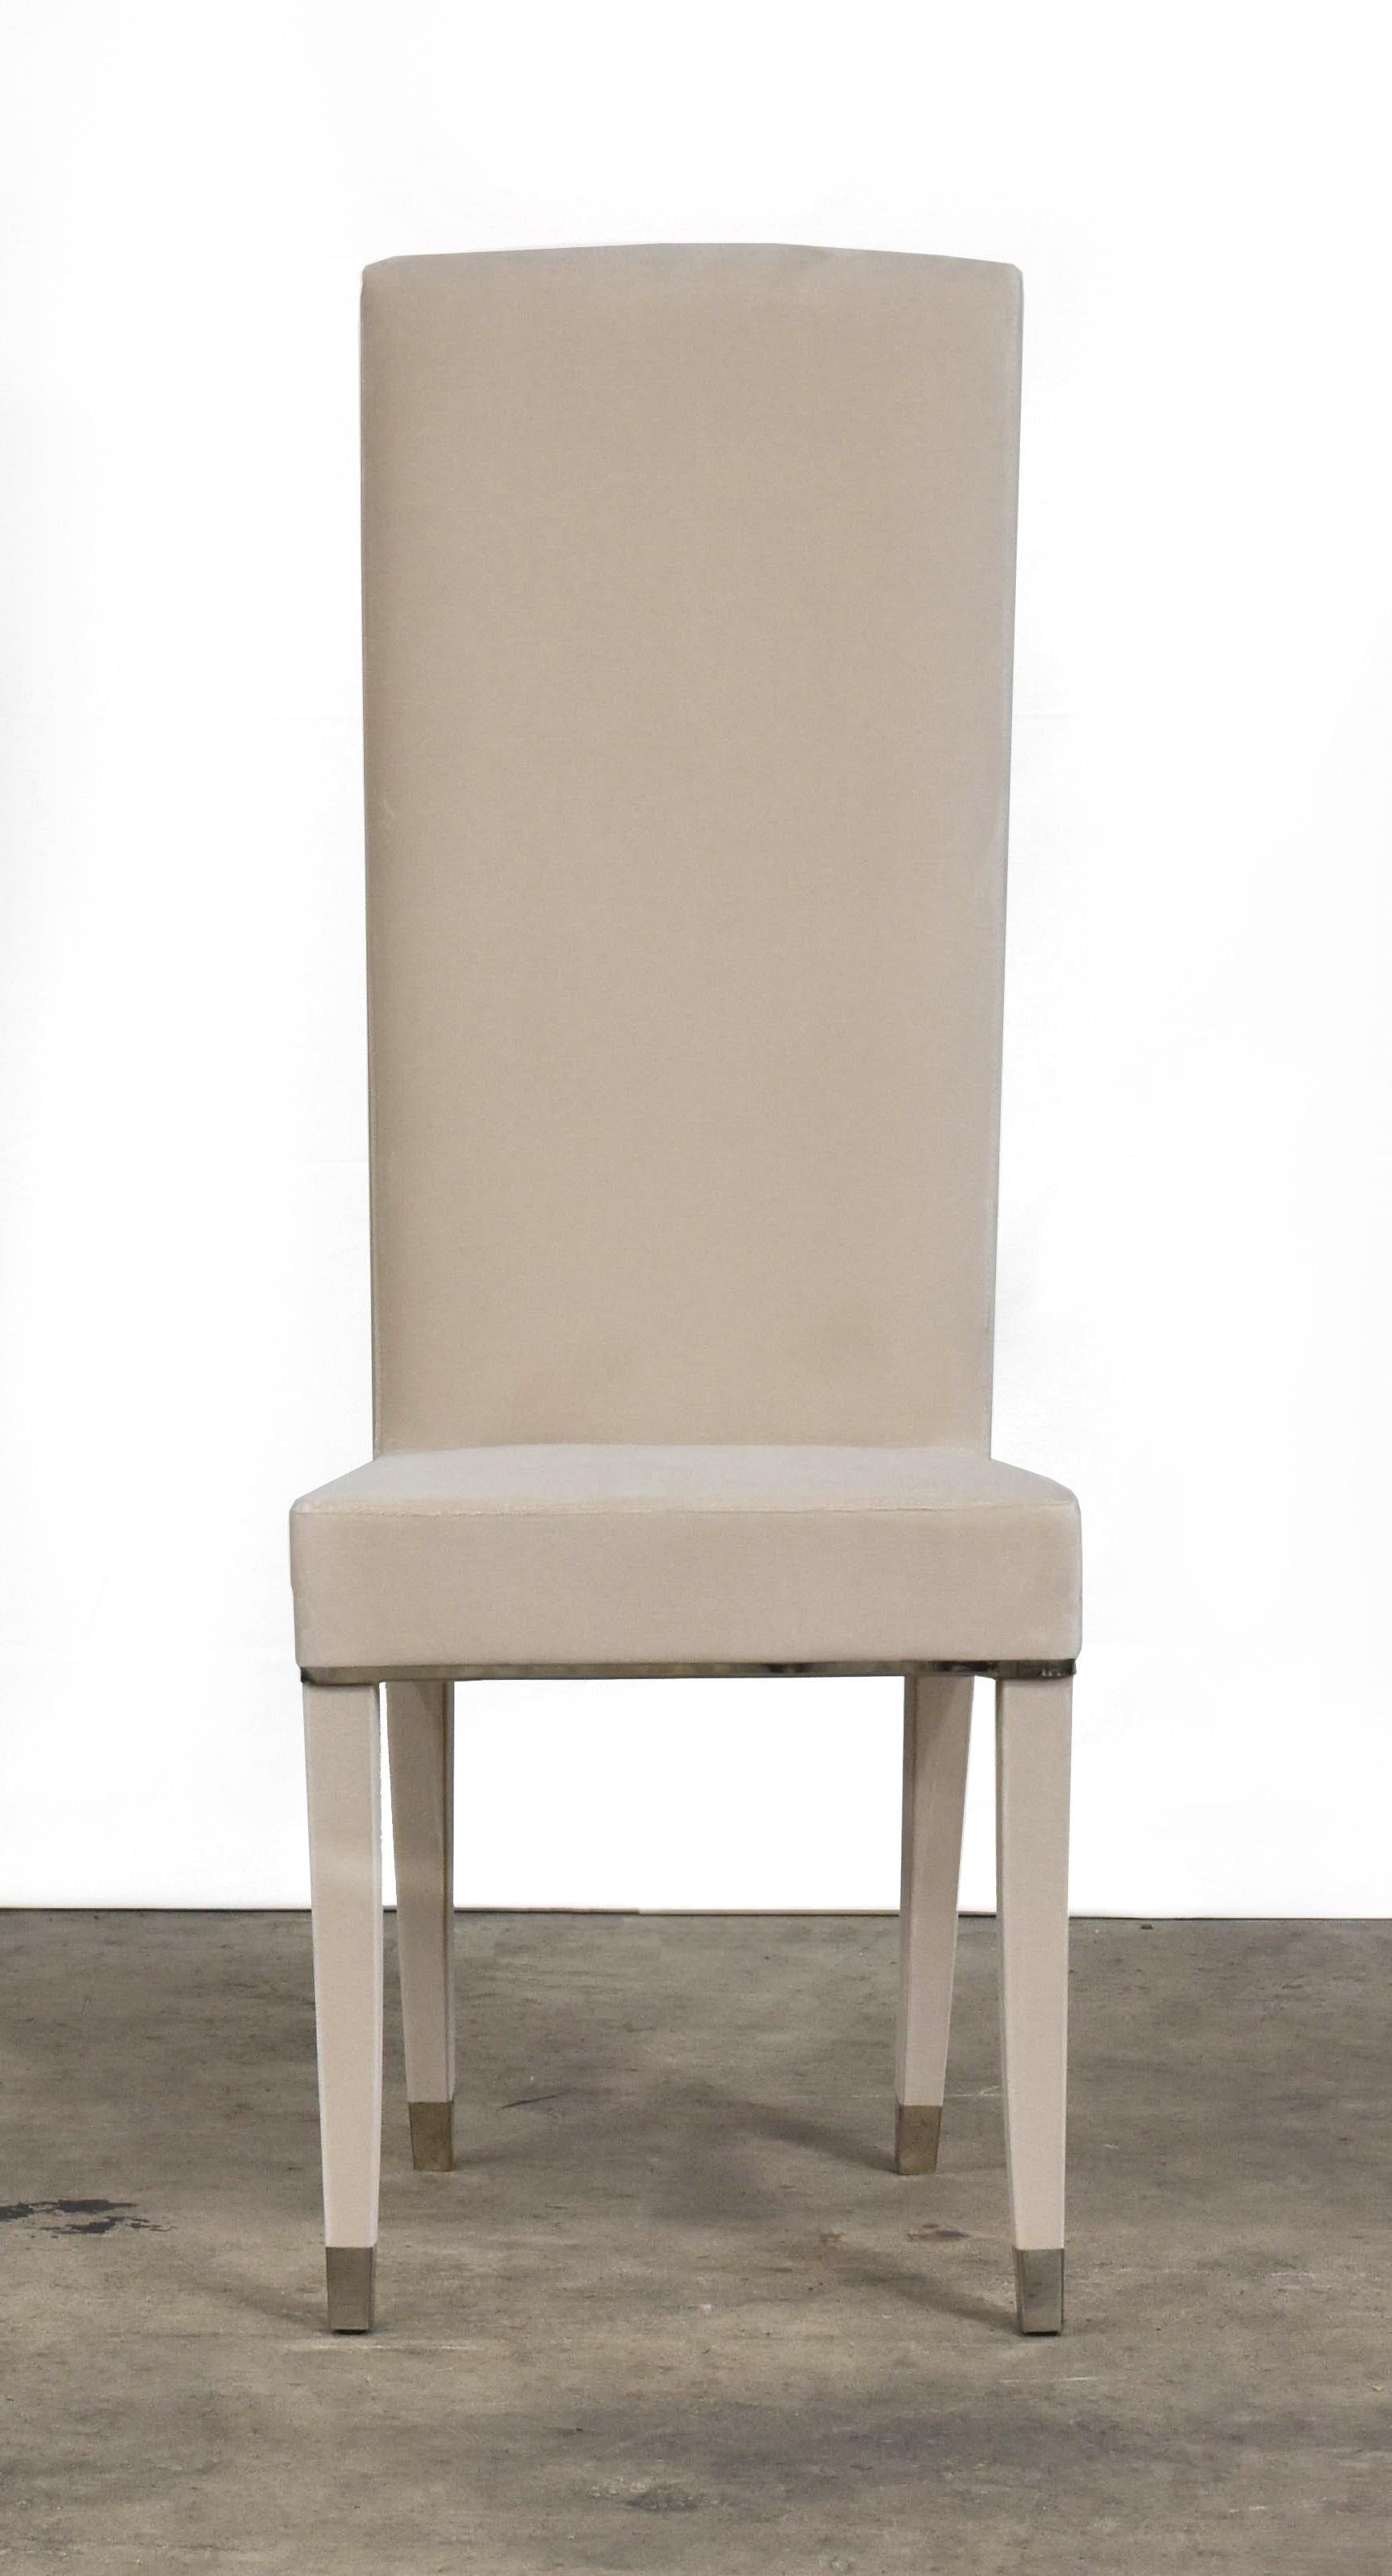 The plisse is an elegant high back chair with a plisse detail on the back. Upholstered in quartz grey velvet with steel detail.
      